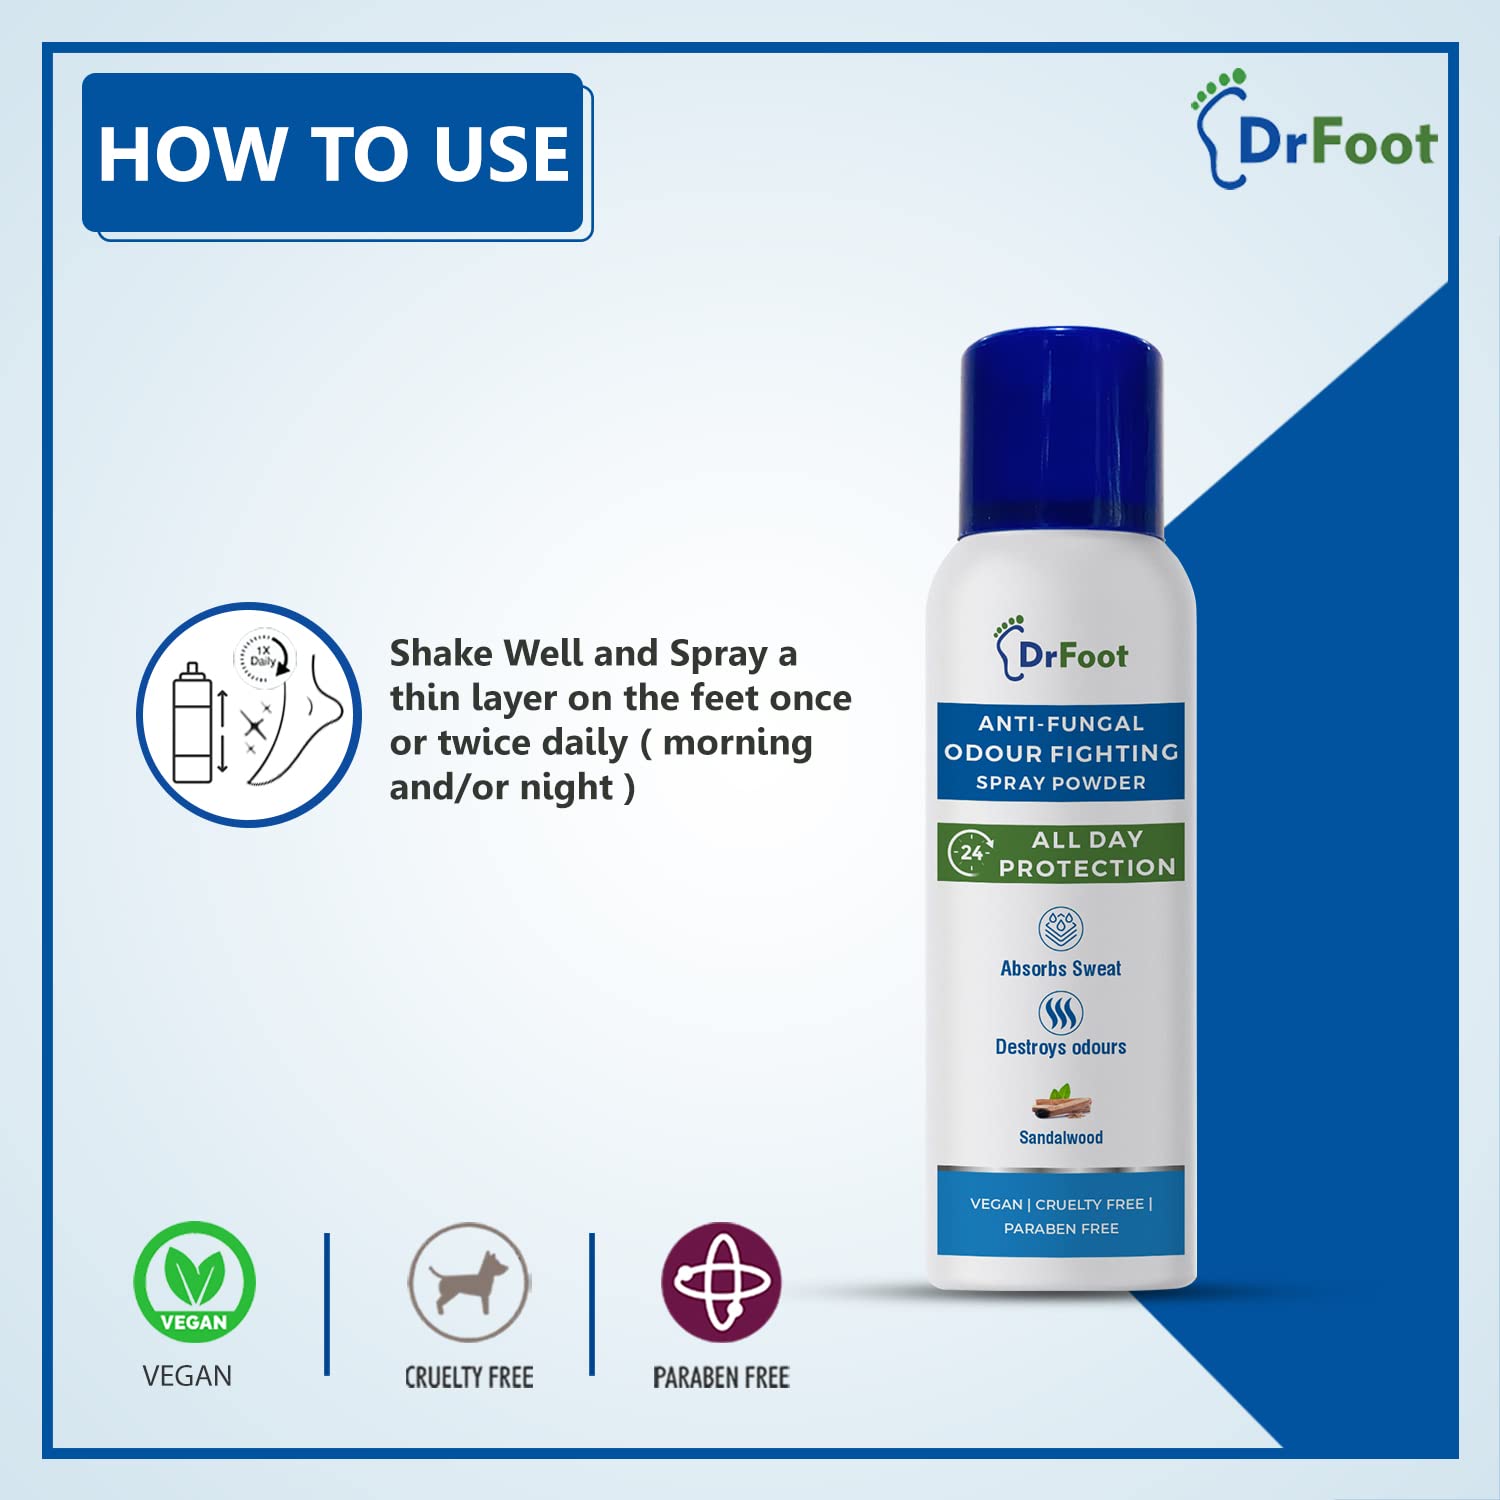 Dr Foot Anti-Fungal Odour Fighting Spray Powder with Neem Powder, Menthol Oil & Sandalwood | Ultimate Odour Neutralizer| Removes Bad Smell & Keep your foot Fresh and Dry – 130ml / 80gm (Pack of 2)